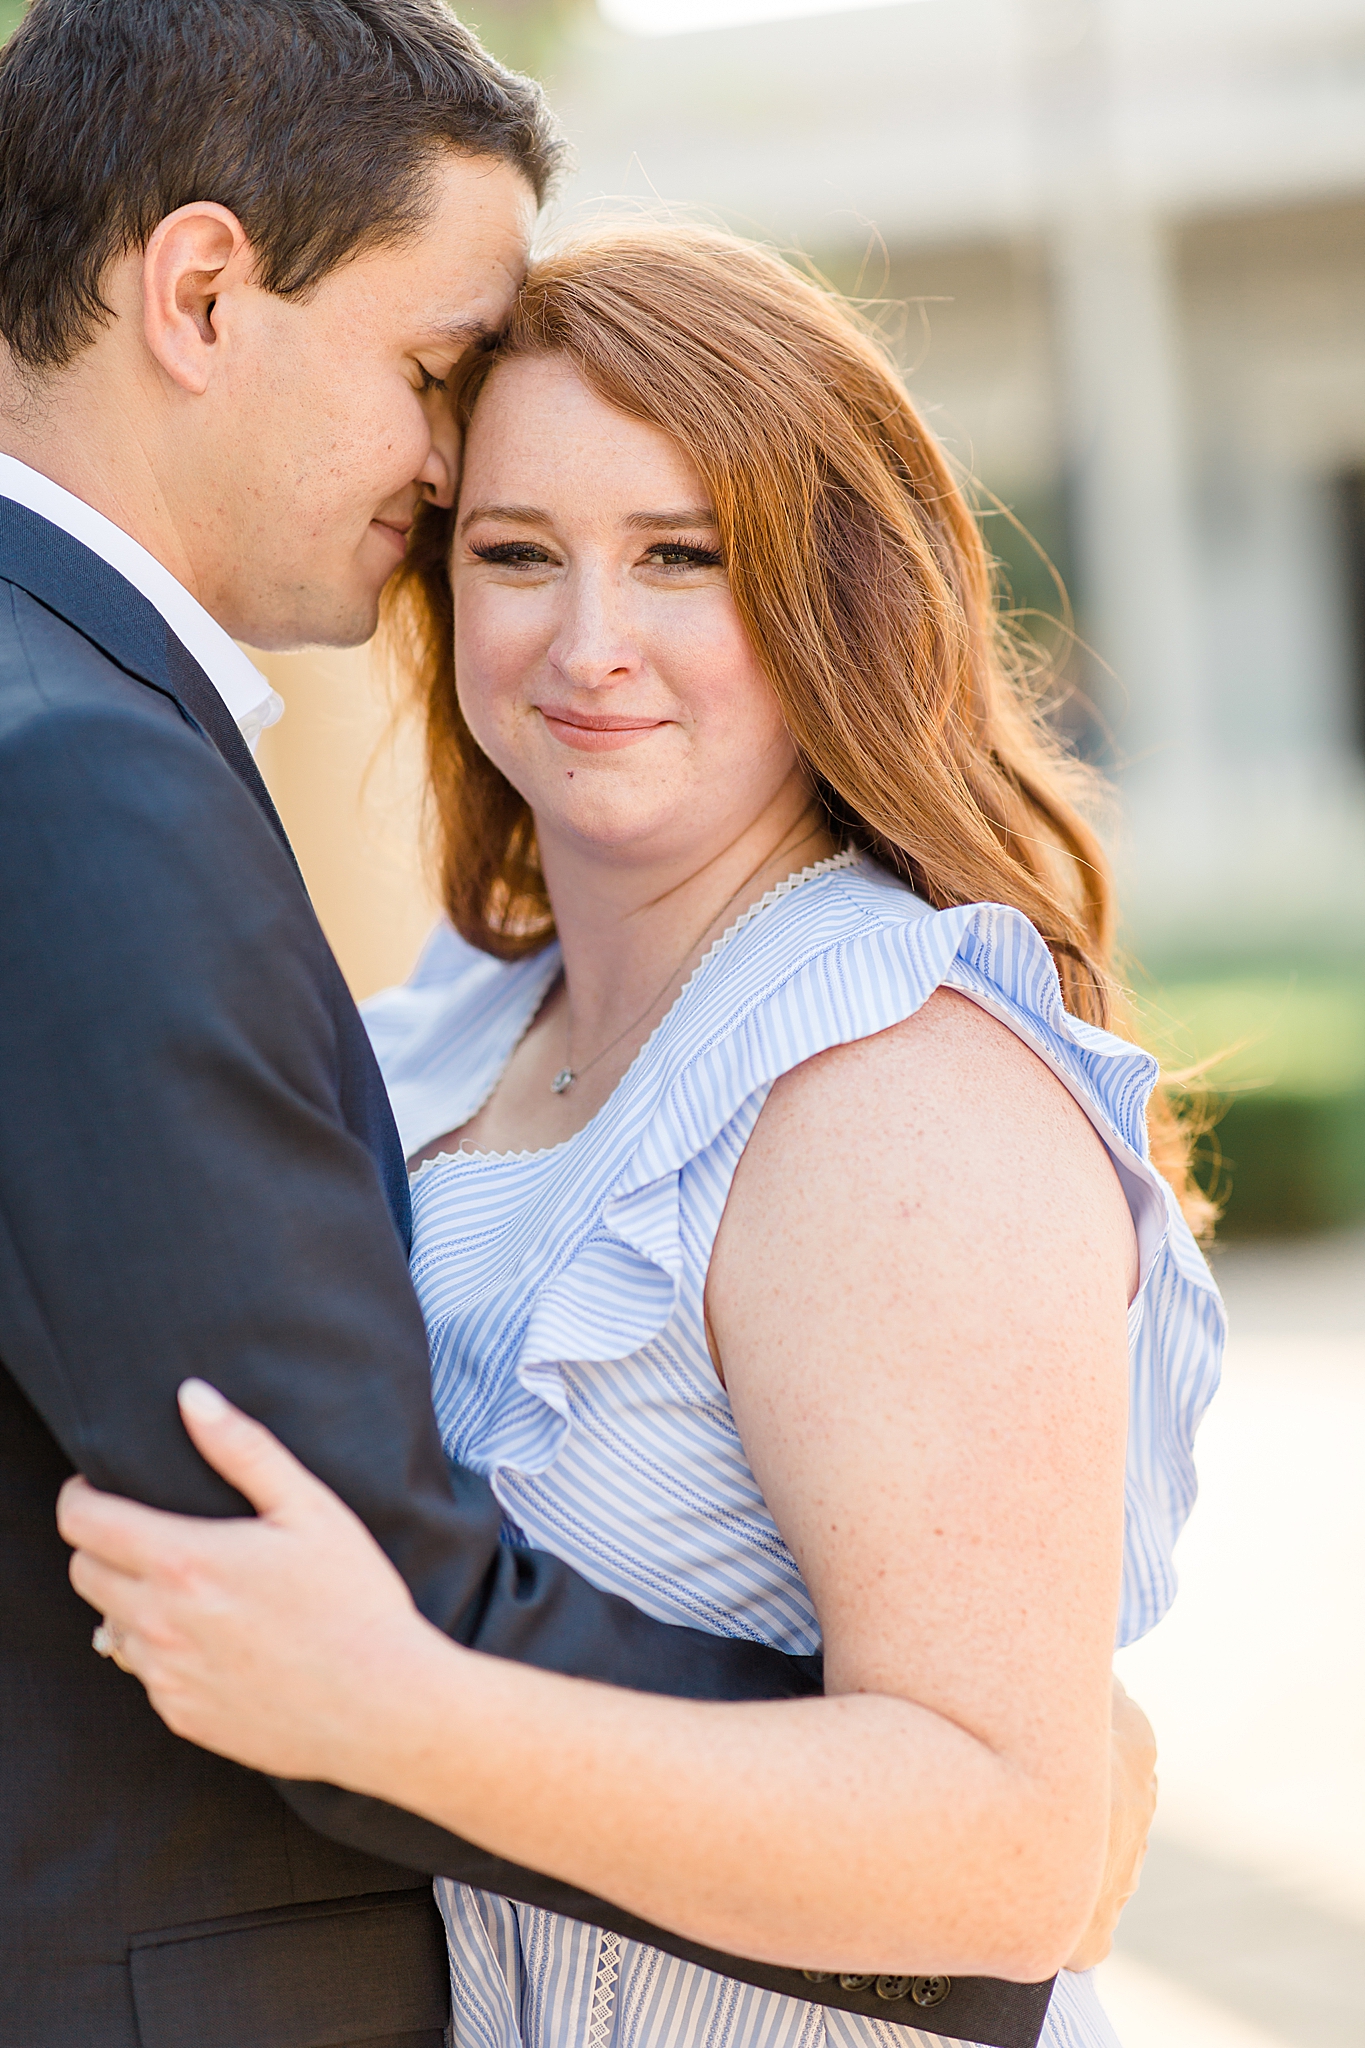 engagement session in Texas town square